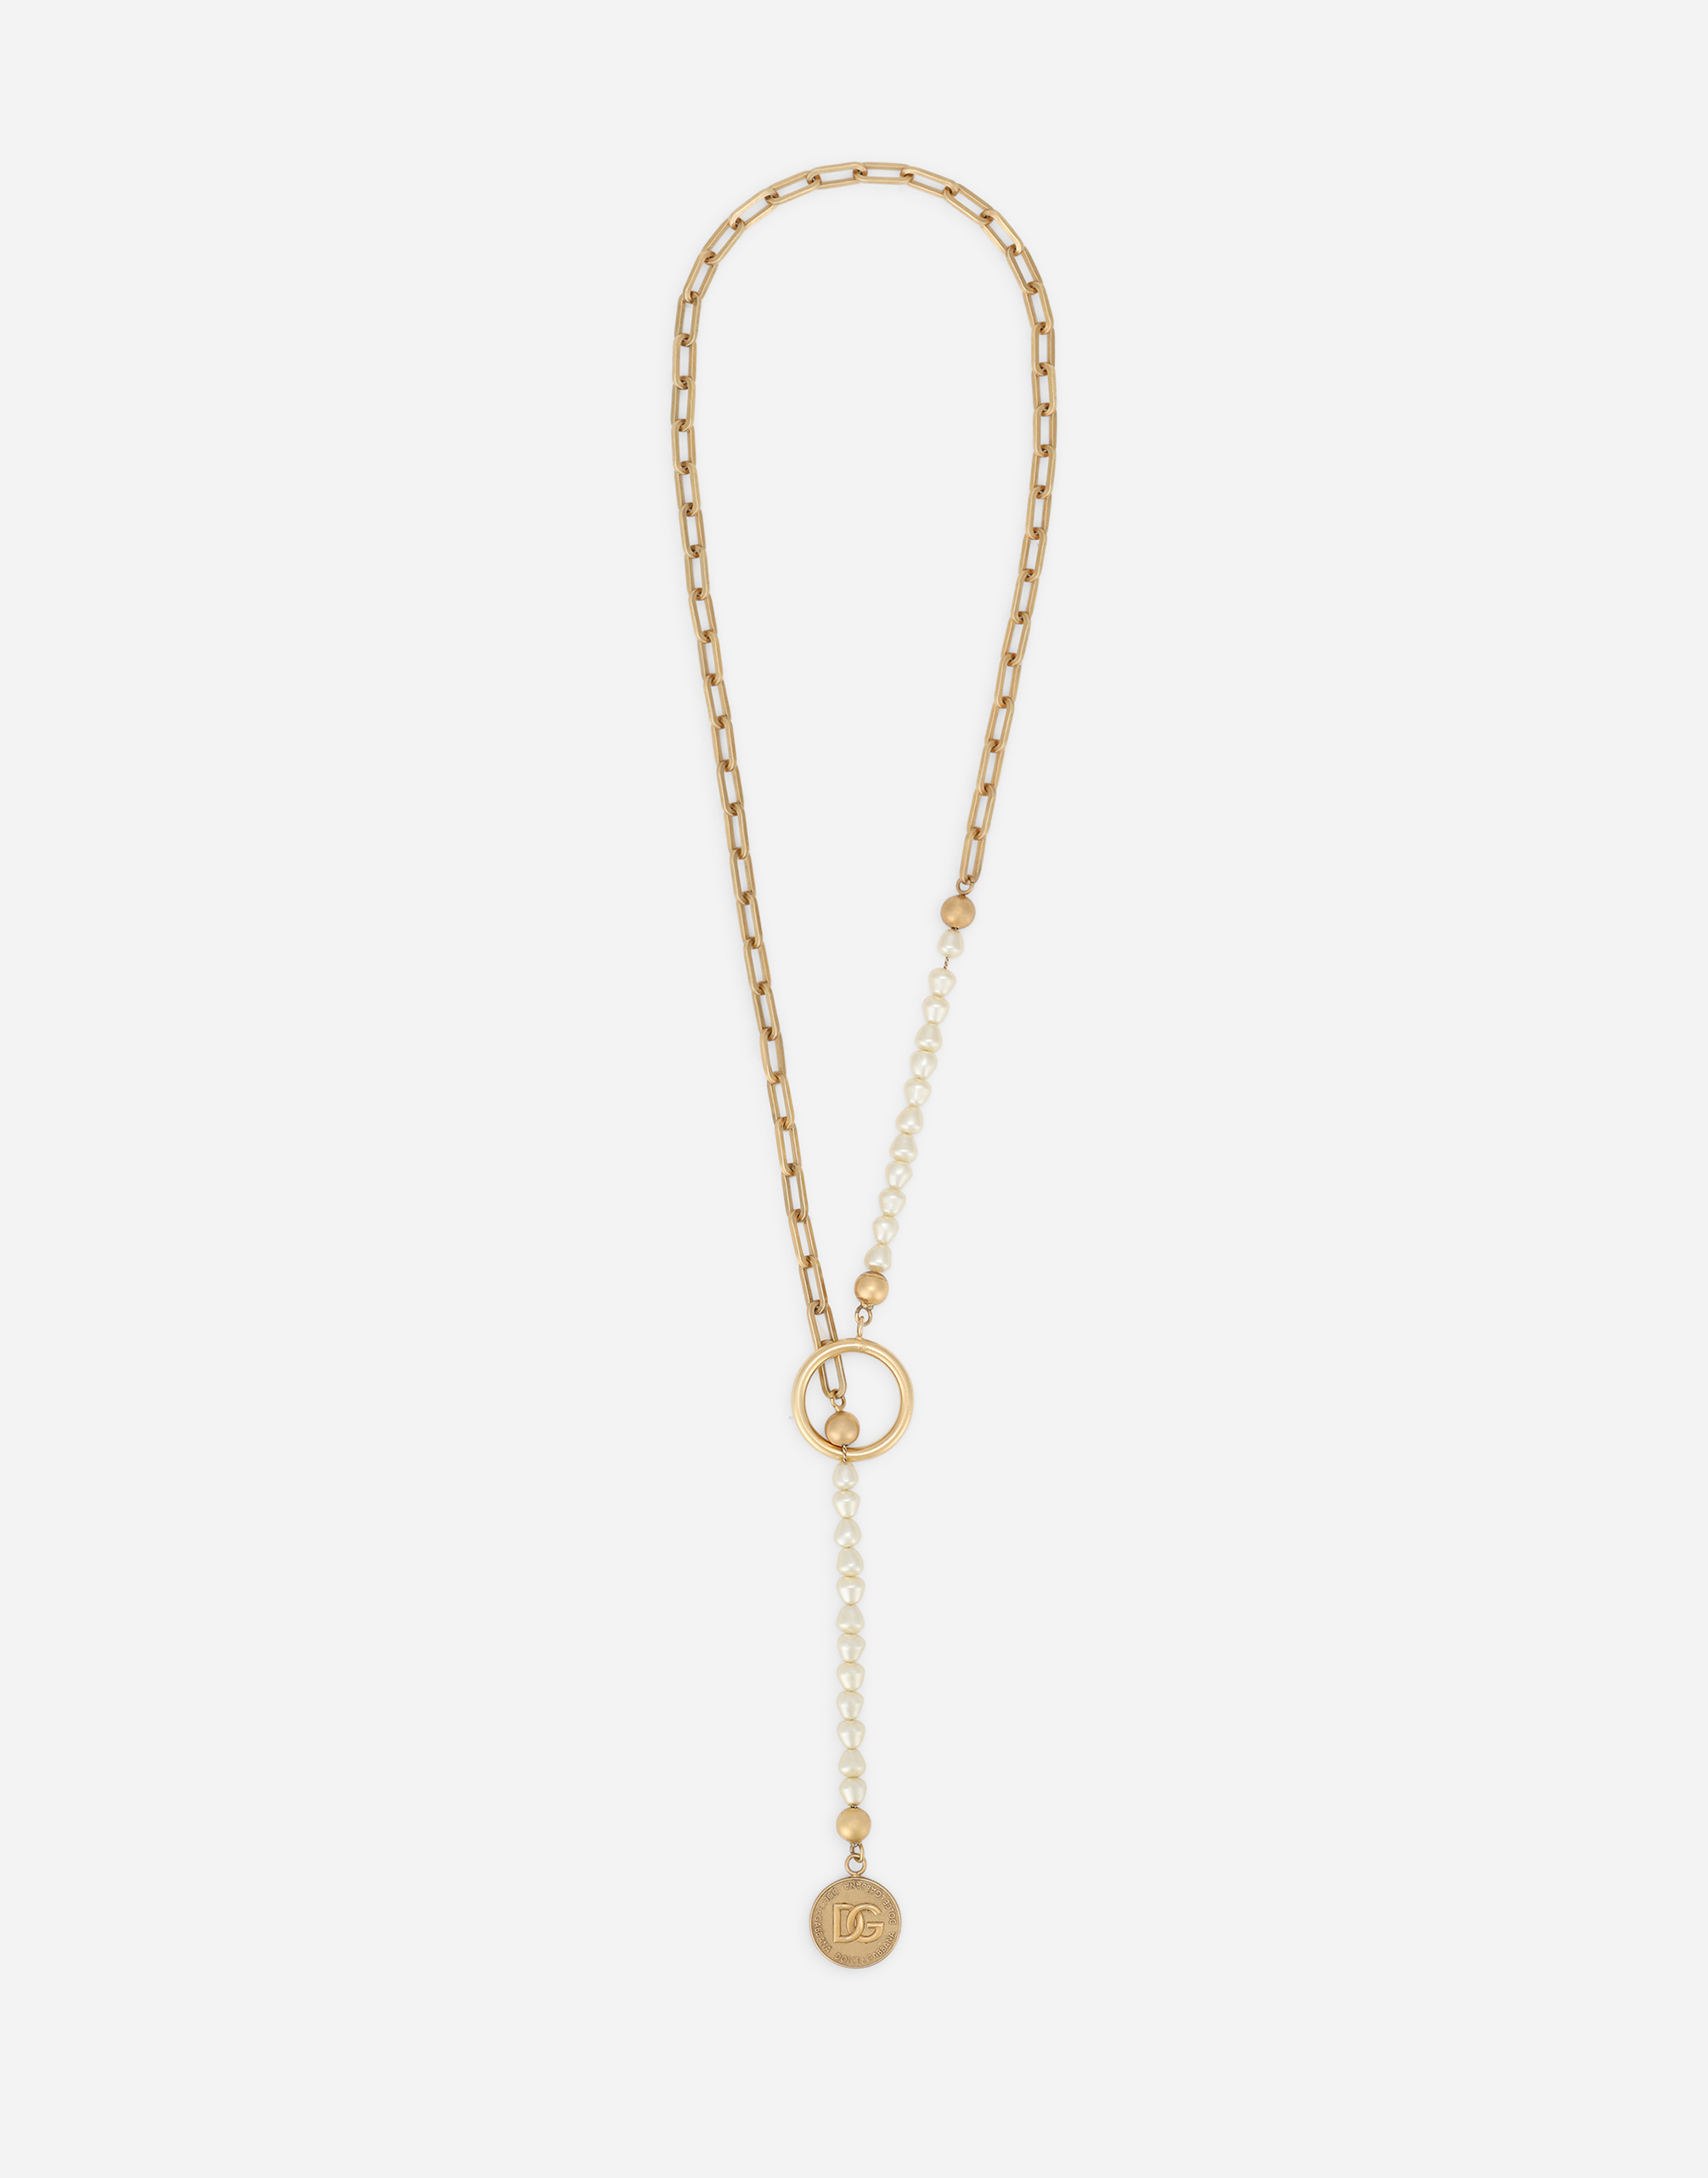 Sautoir necklace with pearls and pendant coin in Gold